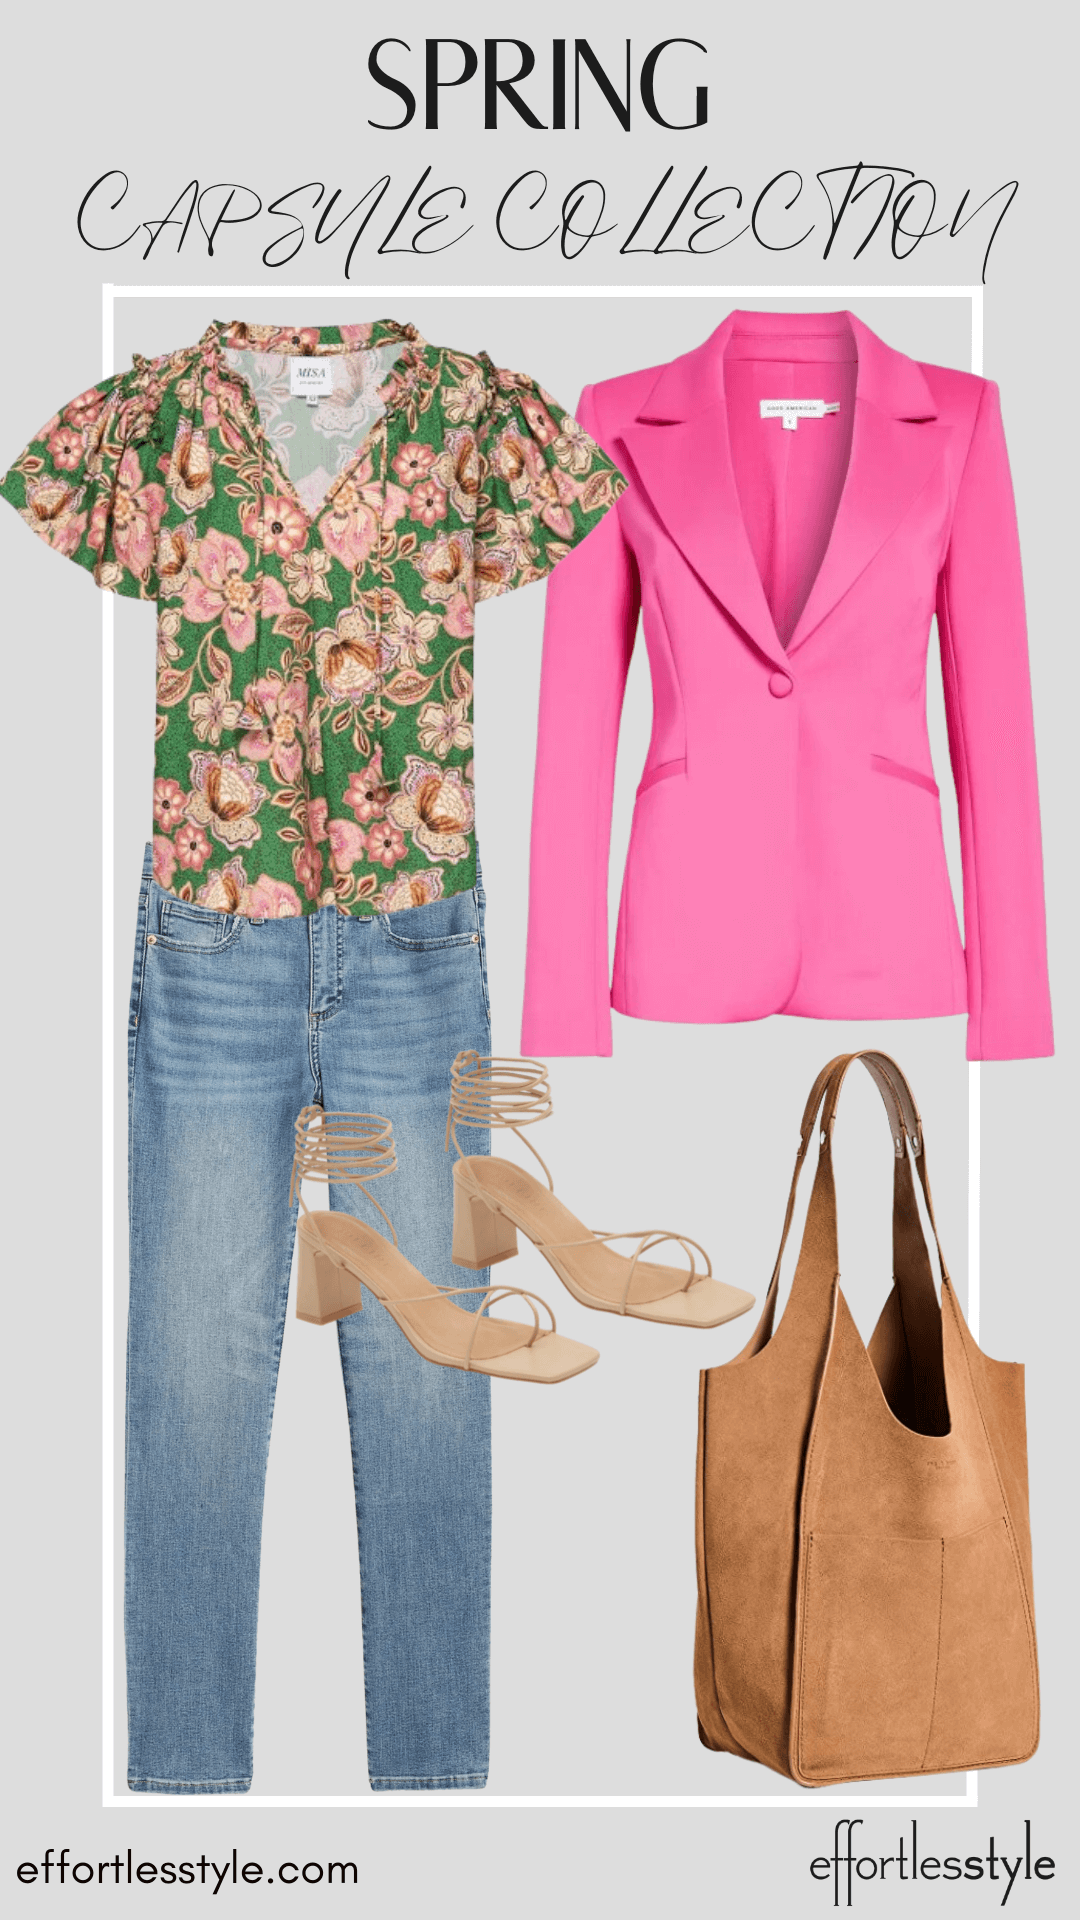 How To Wear Our Spring Capsule Wardrobe - Part 1 Matching Set Top & Statement Blazer & Light Wash Jeans how to create a capsule wardrobe personal stylists talk capsule wardrobes how to utilize all the pieces in your closet go to accessories for spring